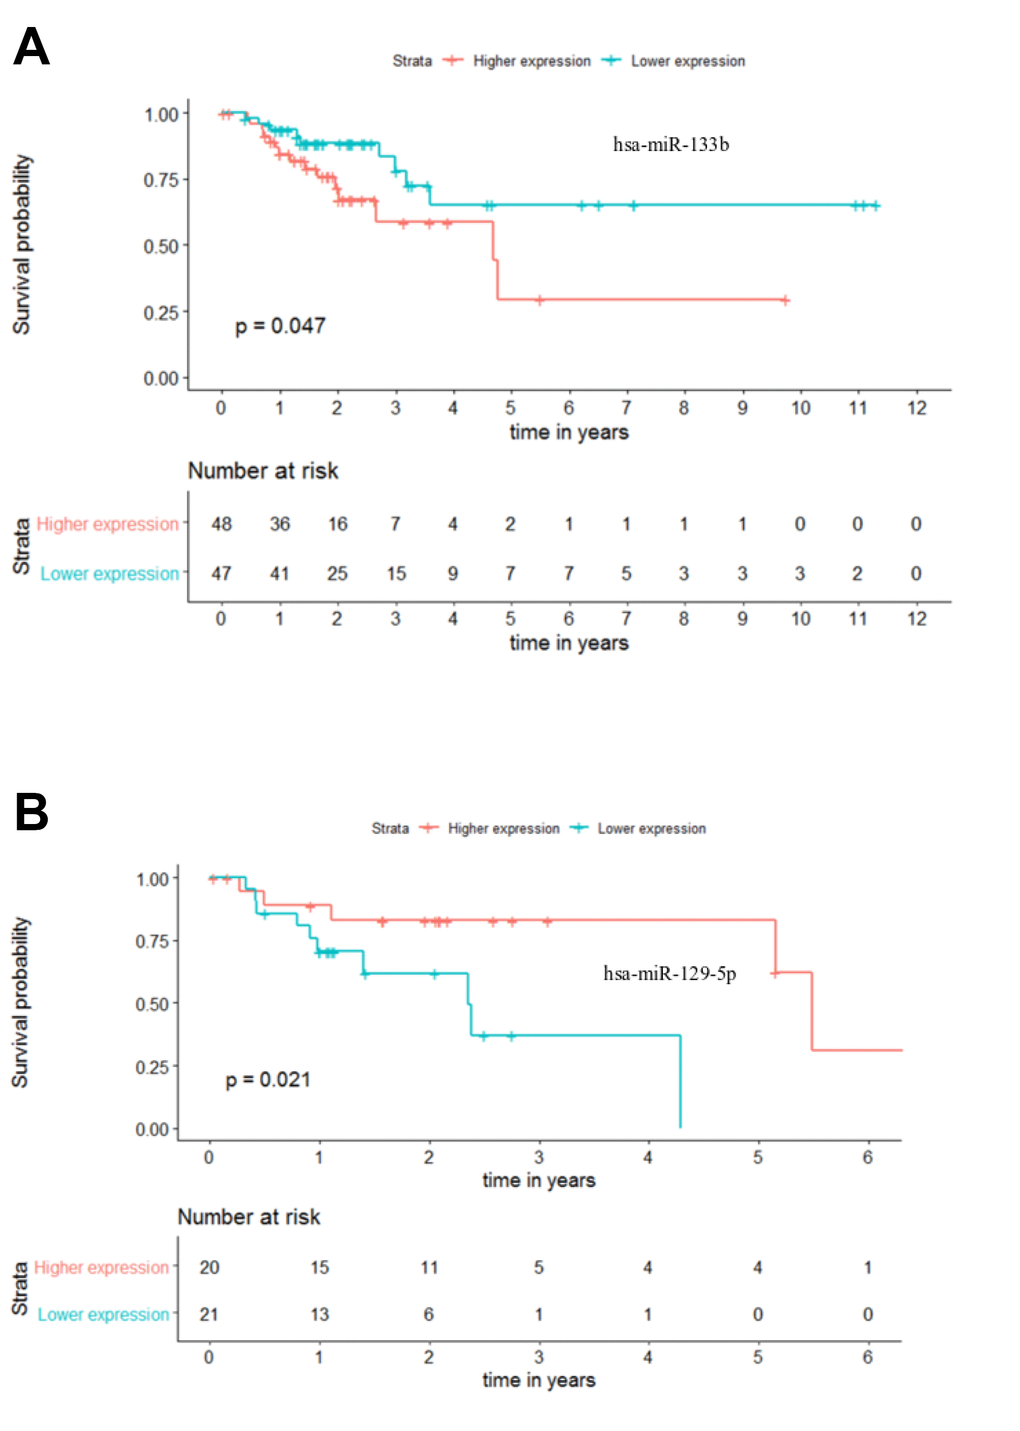 Individual miRNA overall survival (OS) prognosis for stage III and stage IV patients. (A) Stage III OS Kaplan-Meier curve for miR-133b (p-value = 0.047, Log rank; HR = 2.28) (B) Stage IV OS Kaplan-Meier curve for miR-129-5p (p-value = 0.021, Log rank; HR = 4.23). Time is represented in years. Higher (in red) and Lower (in blue) expression groups represent the patients with miRNA expression above and below miRNAs’ median expression, respectively. Censored data is represented by small plus signs in each group. The number of patients at risk for each group and per time point is shown in the table below each graph. HR, hazard ratio.